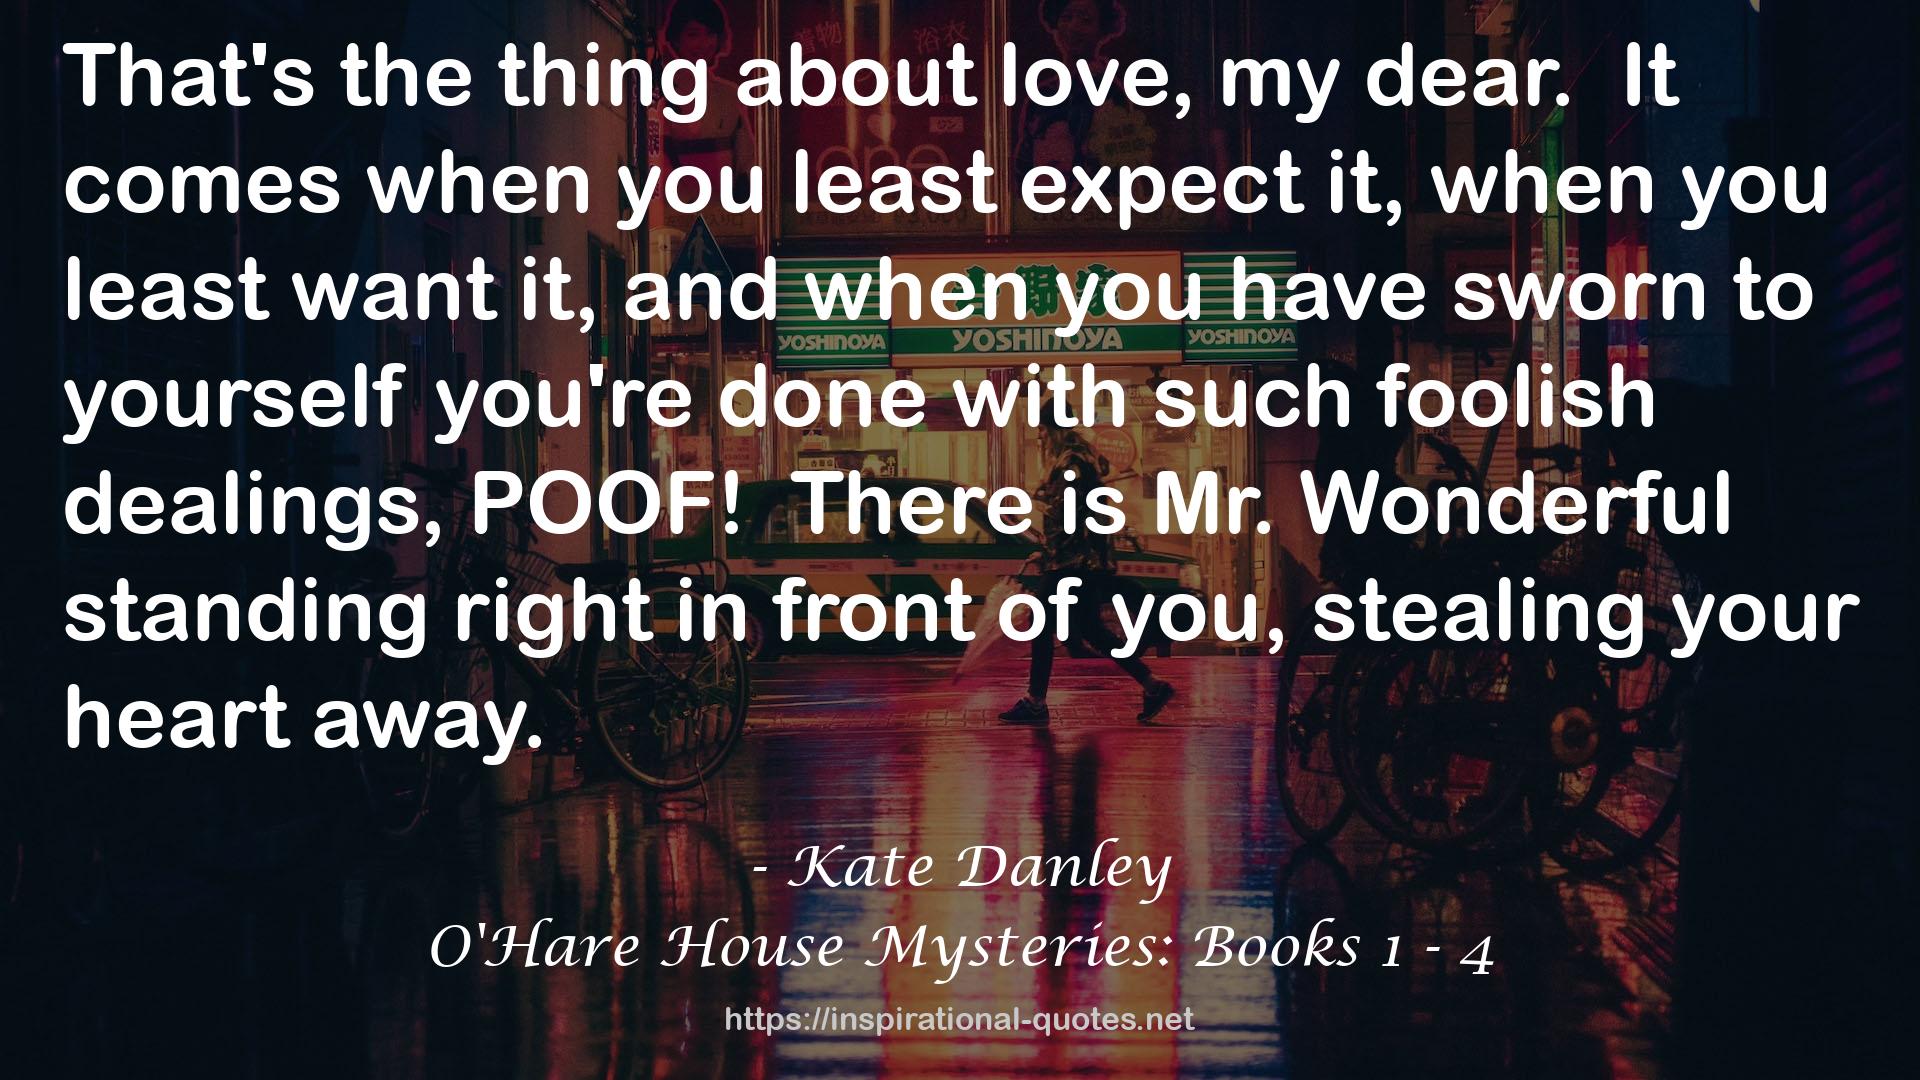 O'Hare House Mysteries: Books 1 - 4 QUOTES